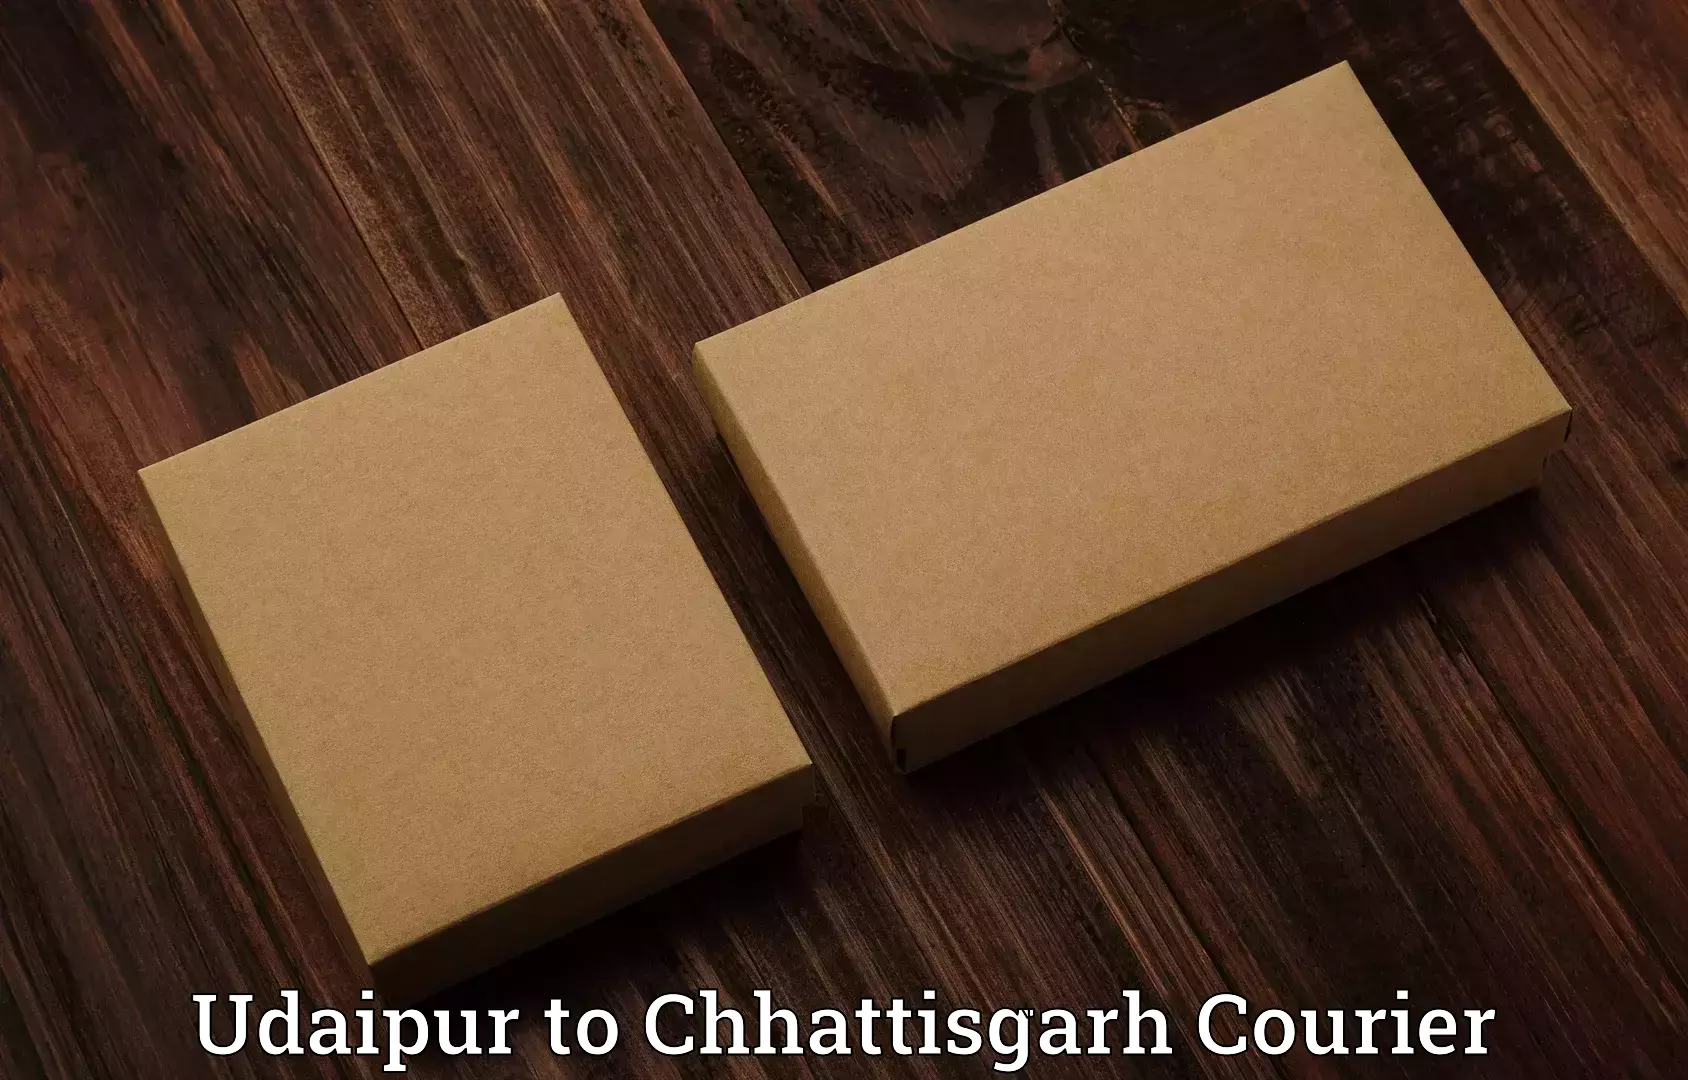 Personal luggage delivery in Udaipur to Bijapur Chhattisgarh